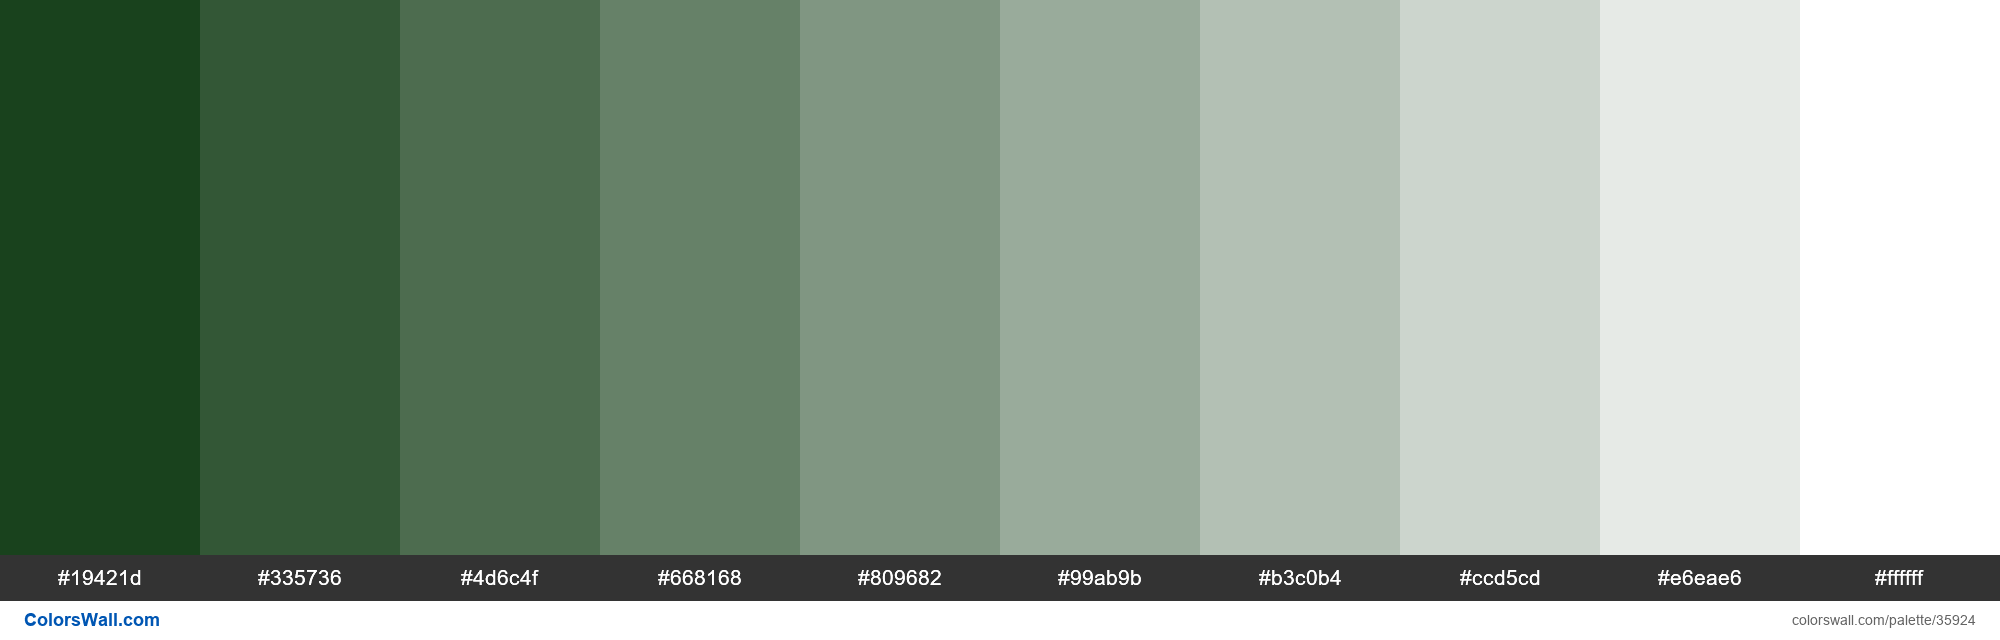 Tints Xkcd Color Dark Forest Green 002d04 Hex Colors Palette Colorswall